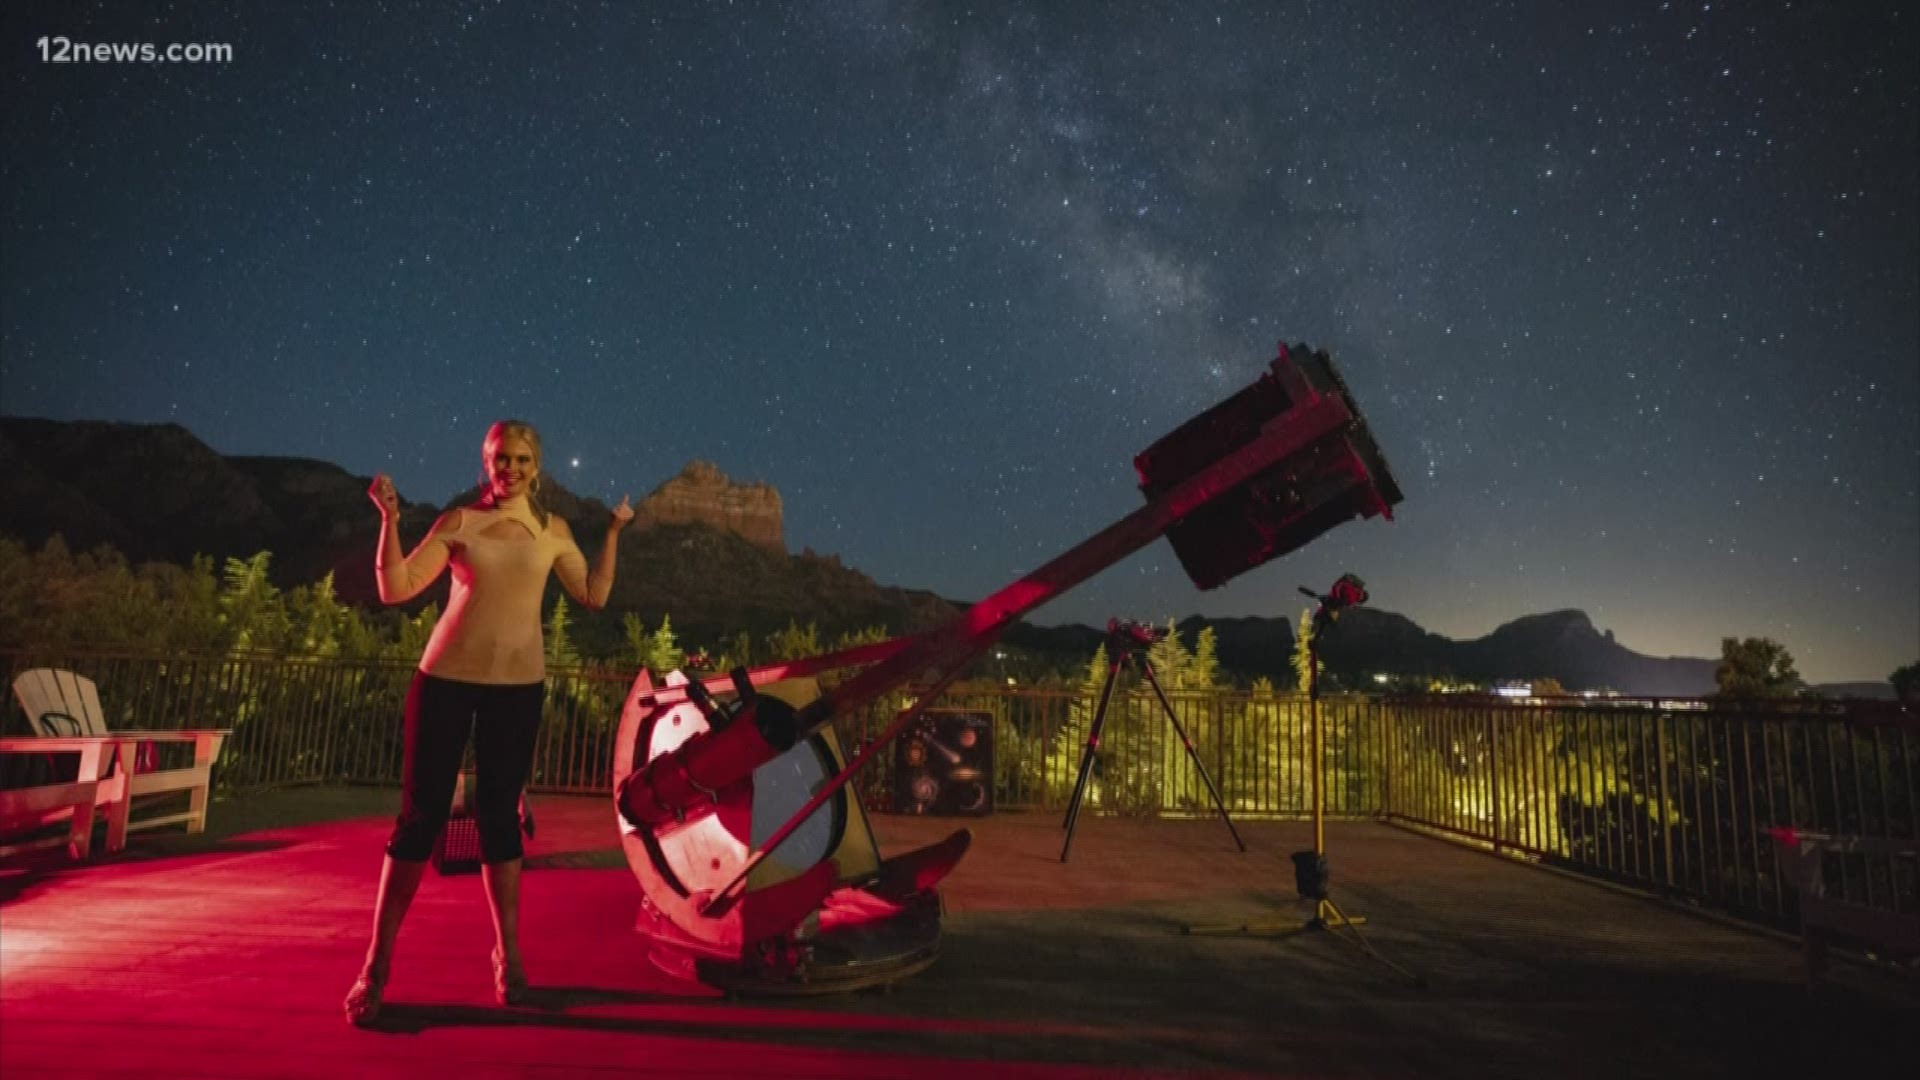 The sky is majestic in this International Dark-Sky Community and you can experience it like no one else with a one-of-kind telescope.